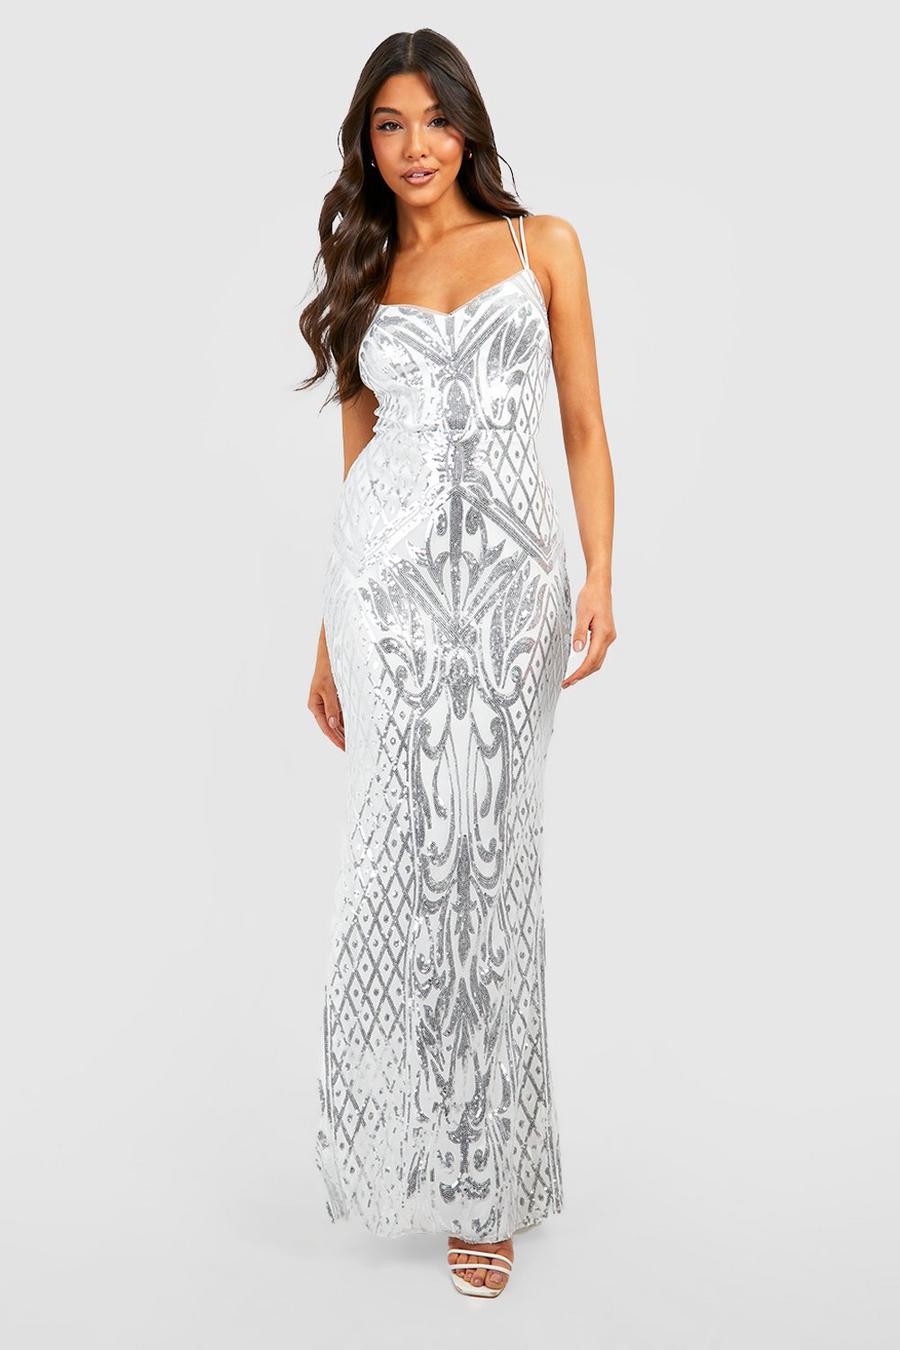 Silver Sequin Damask Open Back Fishtail Maxi Party Dress